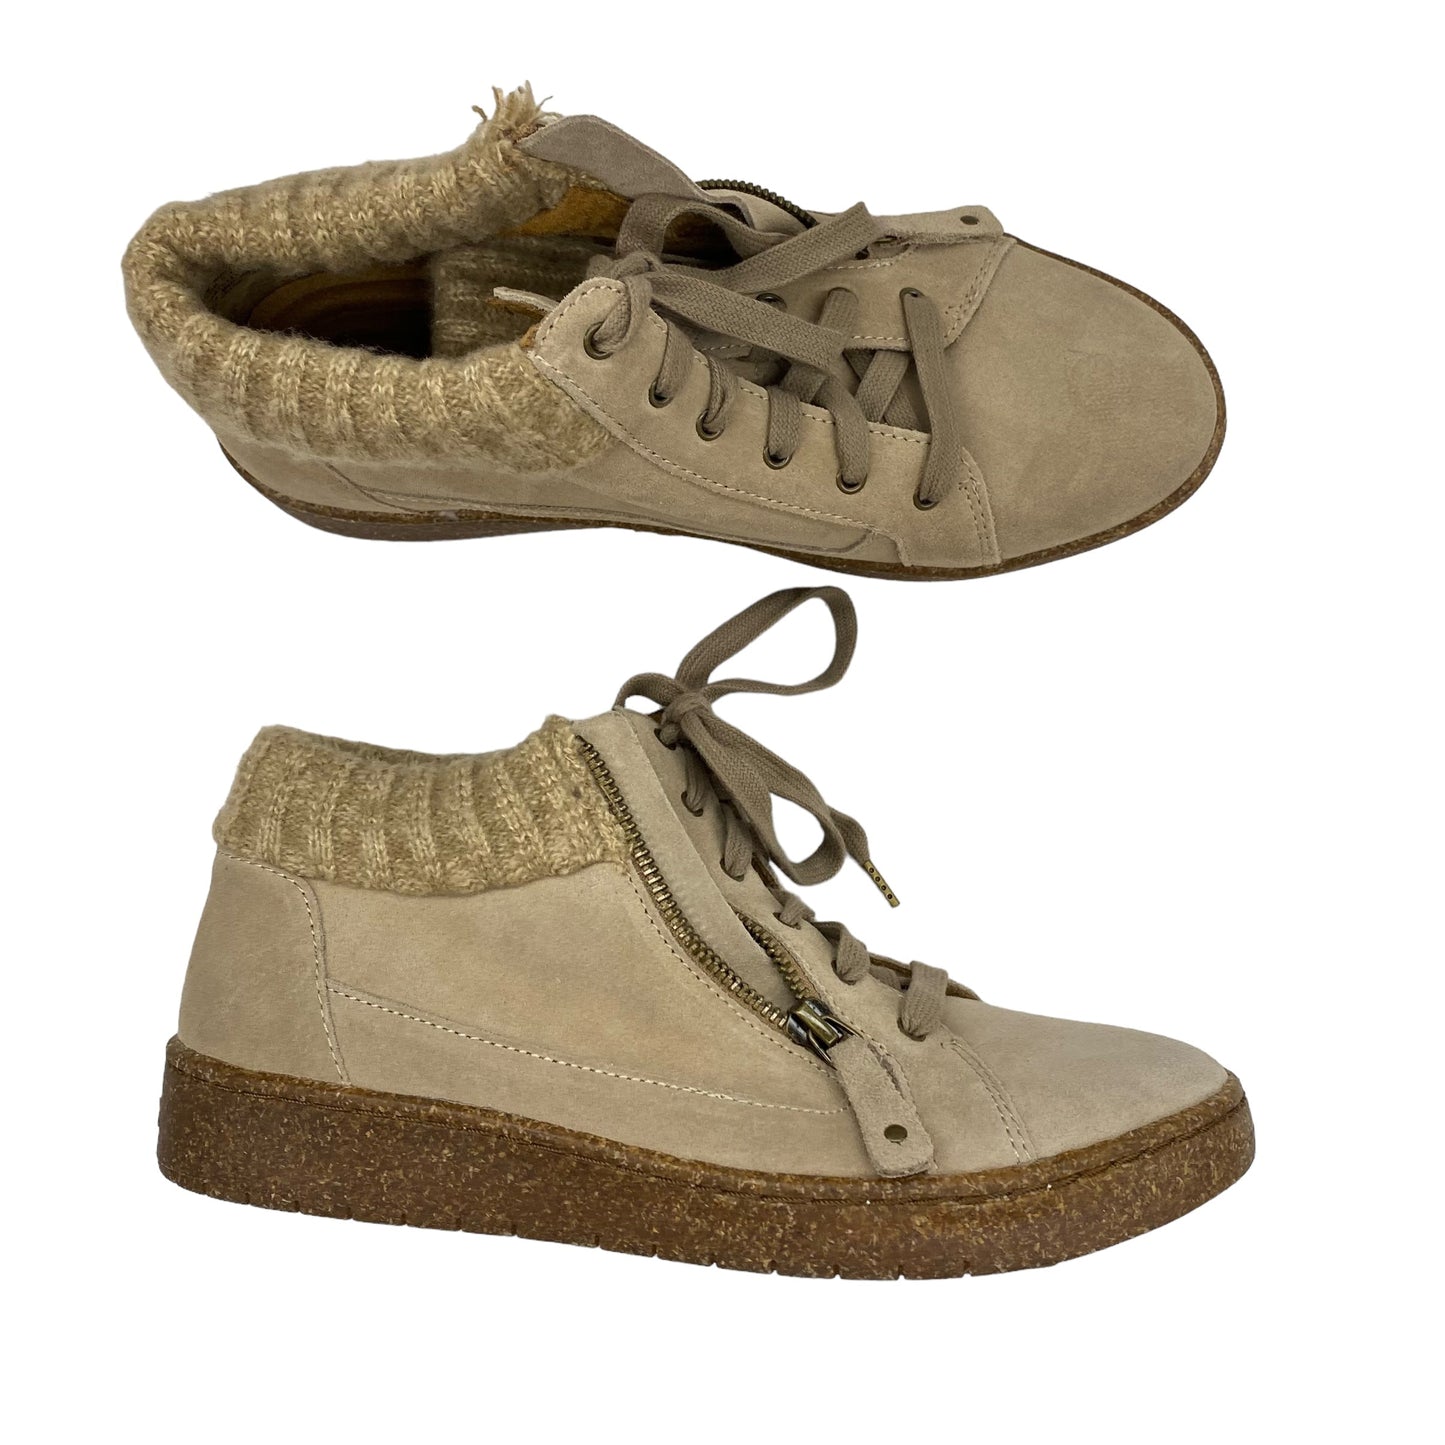 TAN SHOES SNEAKERS by AETREX Size:8.5